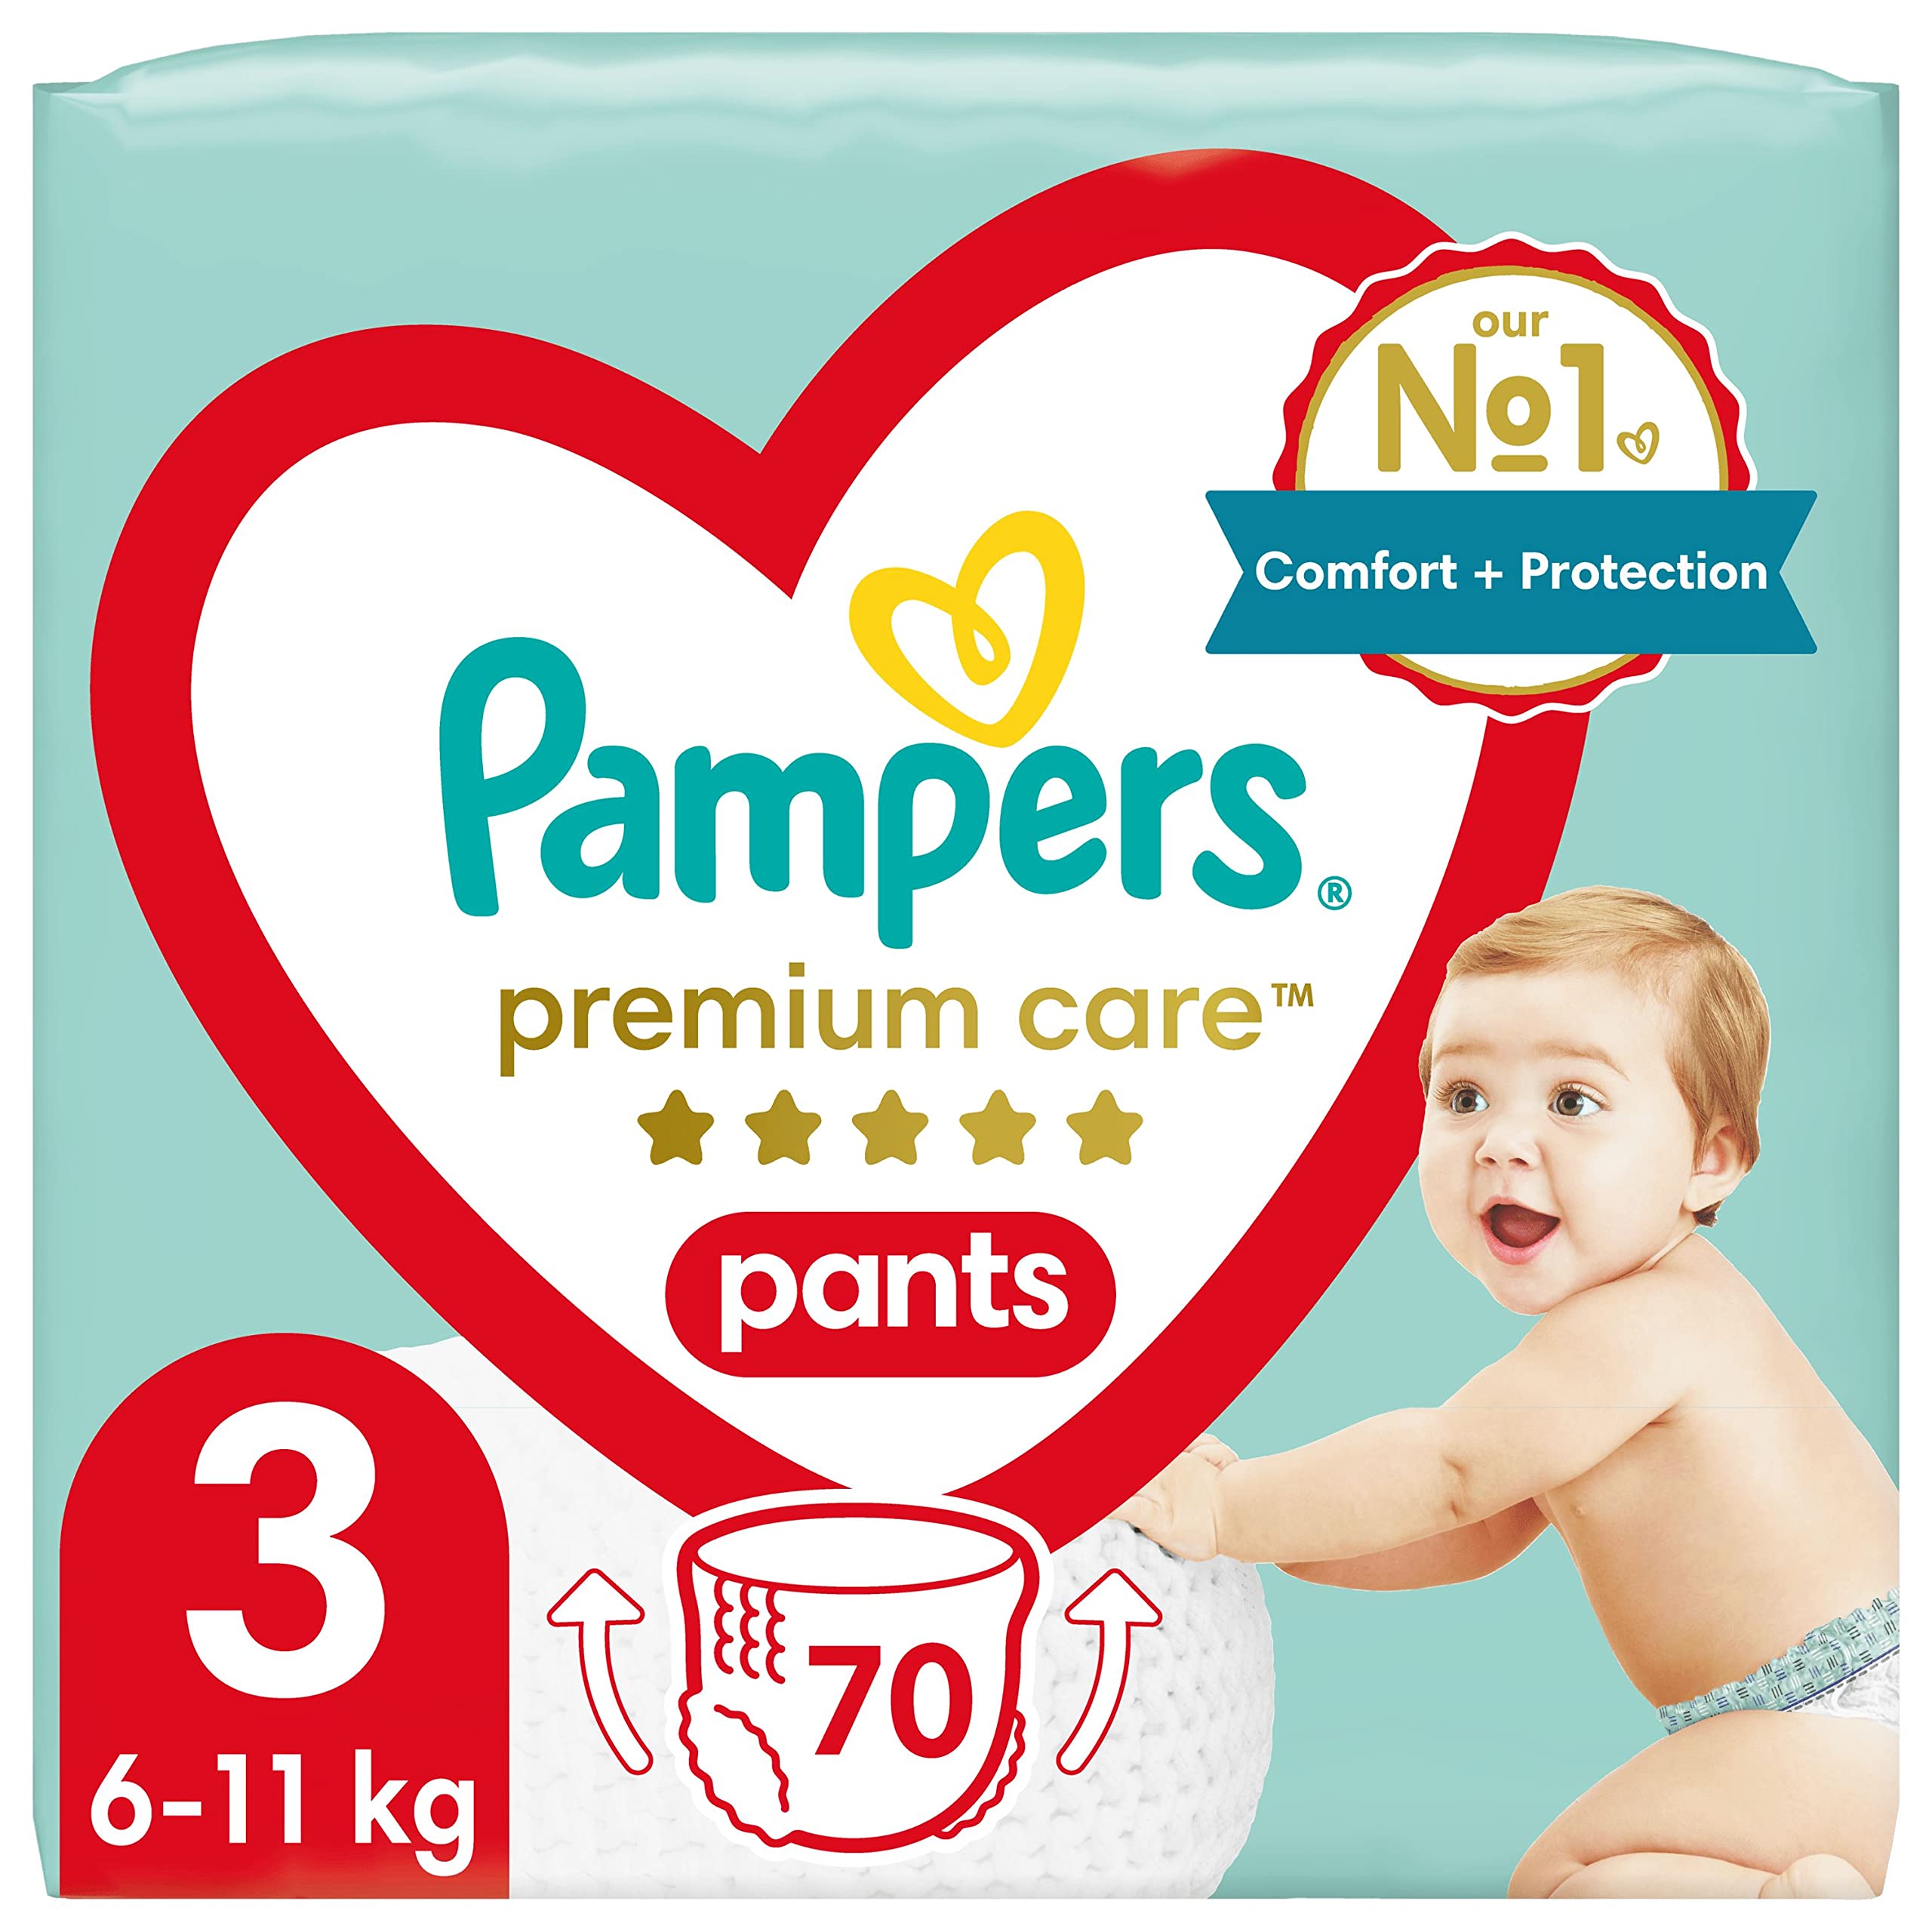 pampers pro opinie